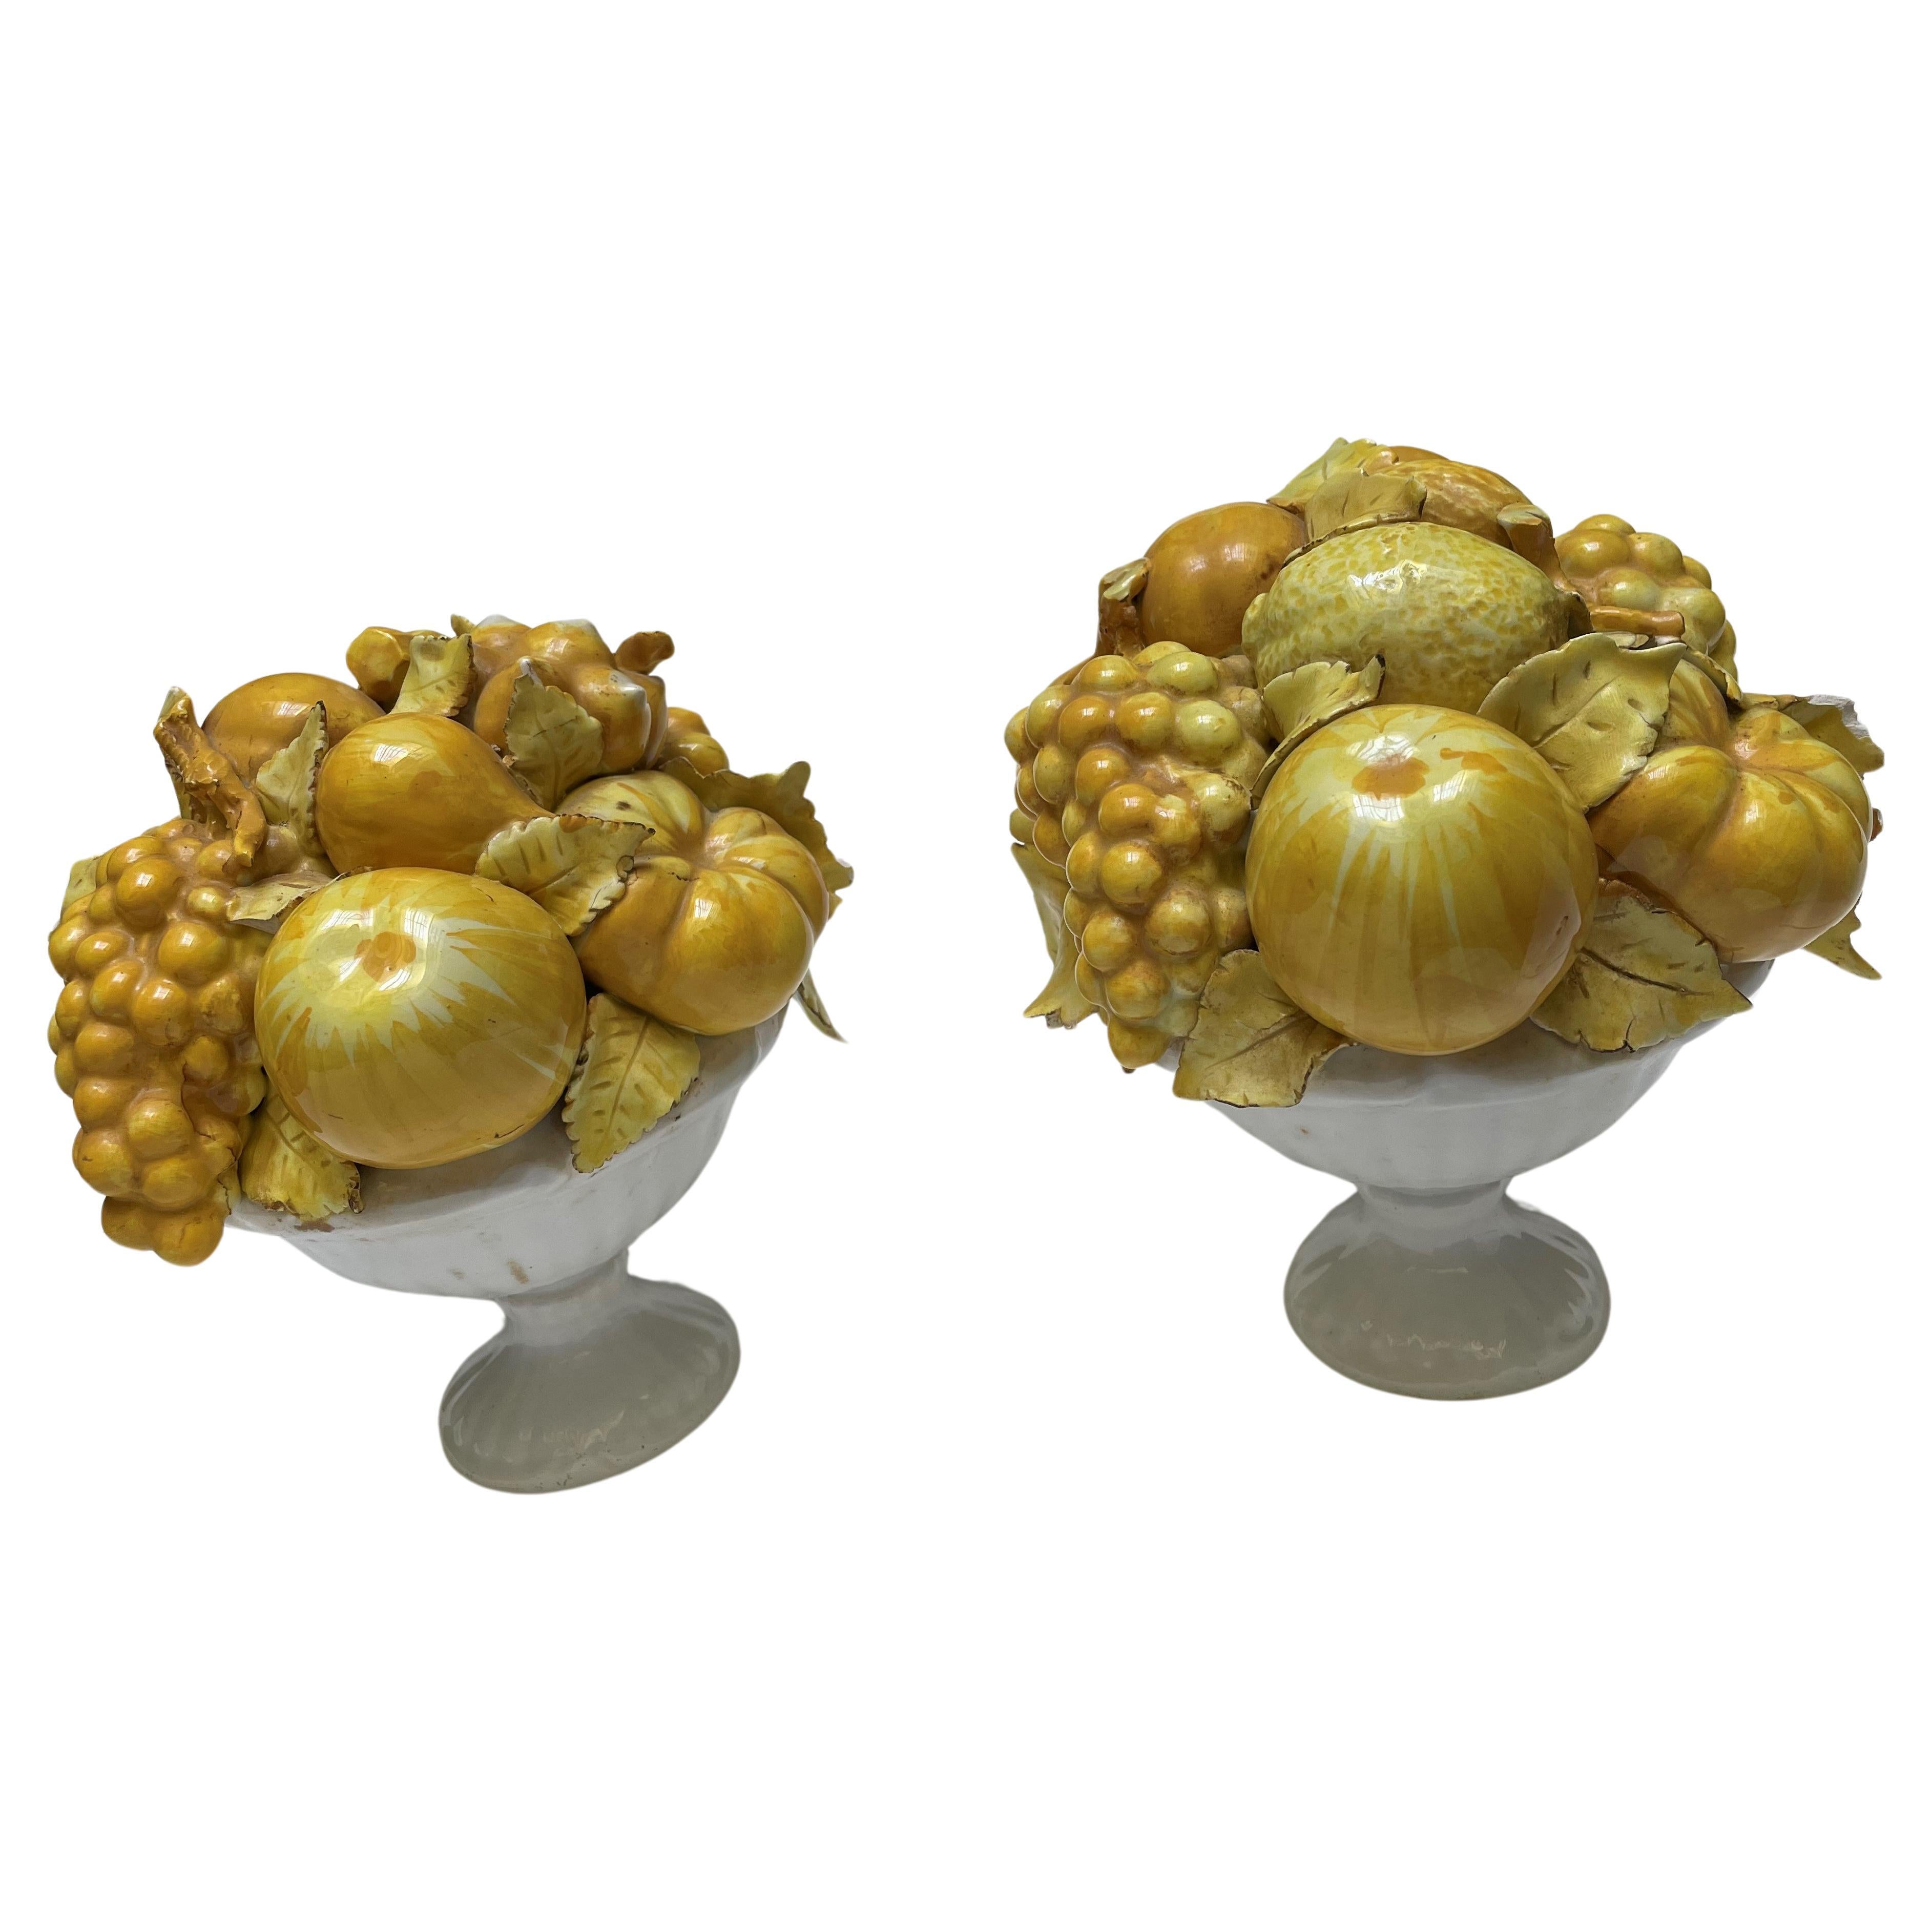 Italian Ceramic Yellow Glazed Fruit in White Footed Bowl Centerpiece a Pair